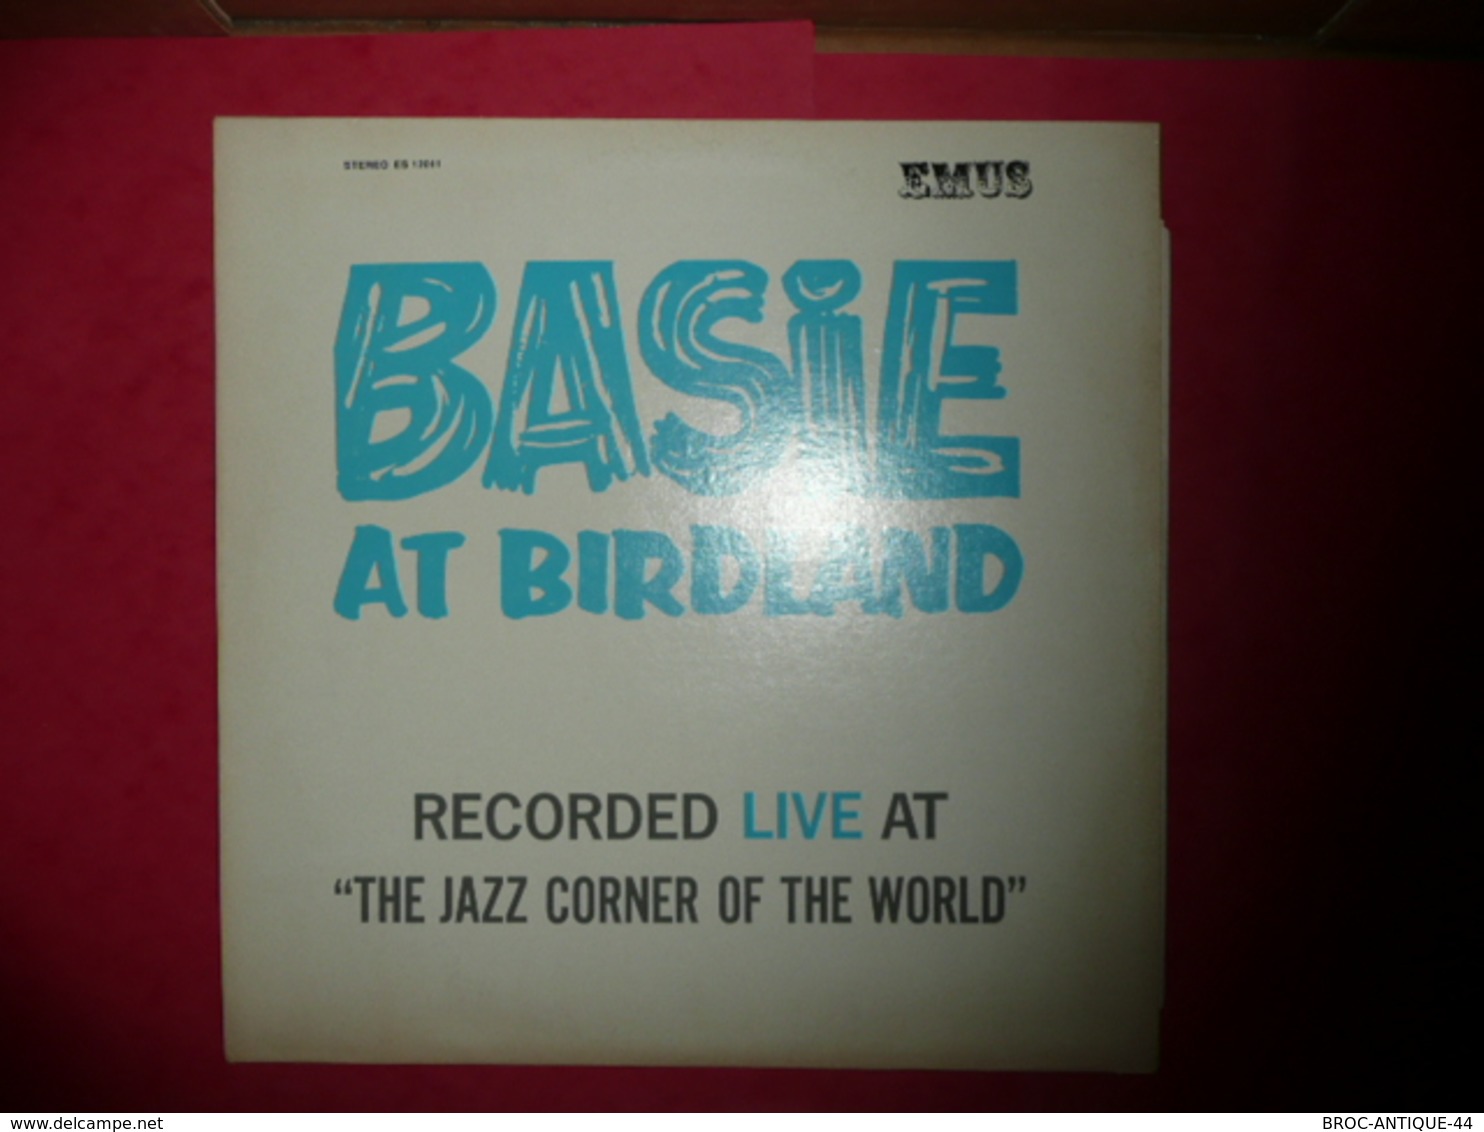 LP33 N°576 - BASIE AT BIRDLAND - RECORDED LIVE AT THE JAZZ CORNER OF THE WORLD - COMPILATION 9 TITRES - Jazz